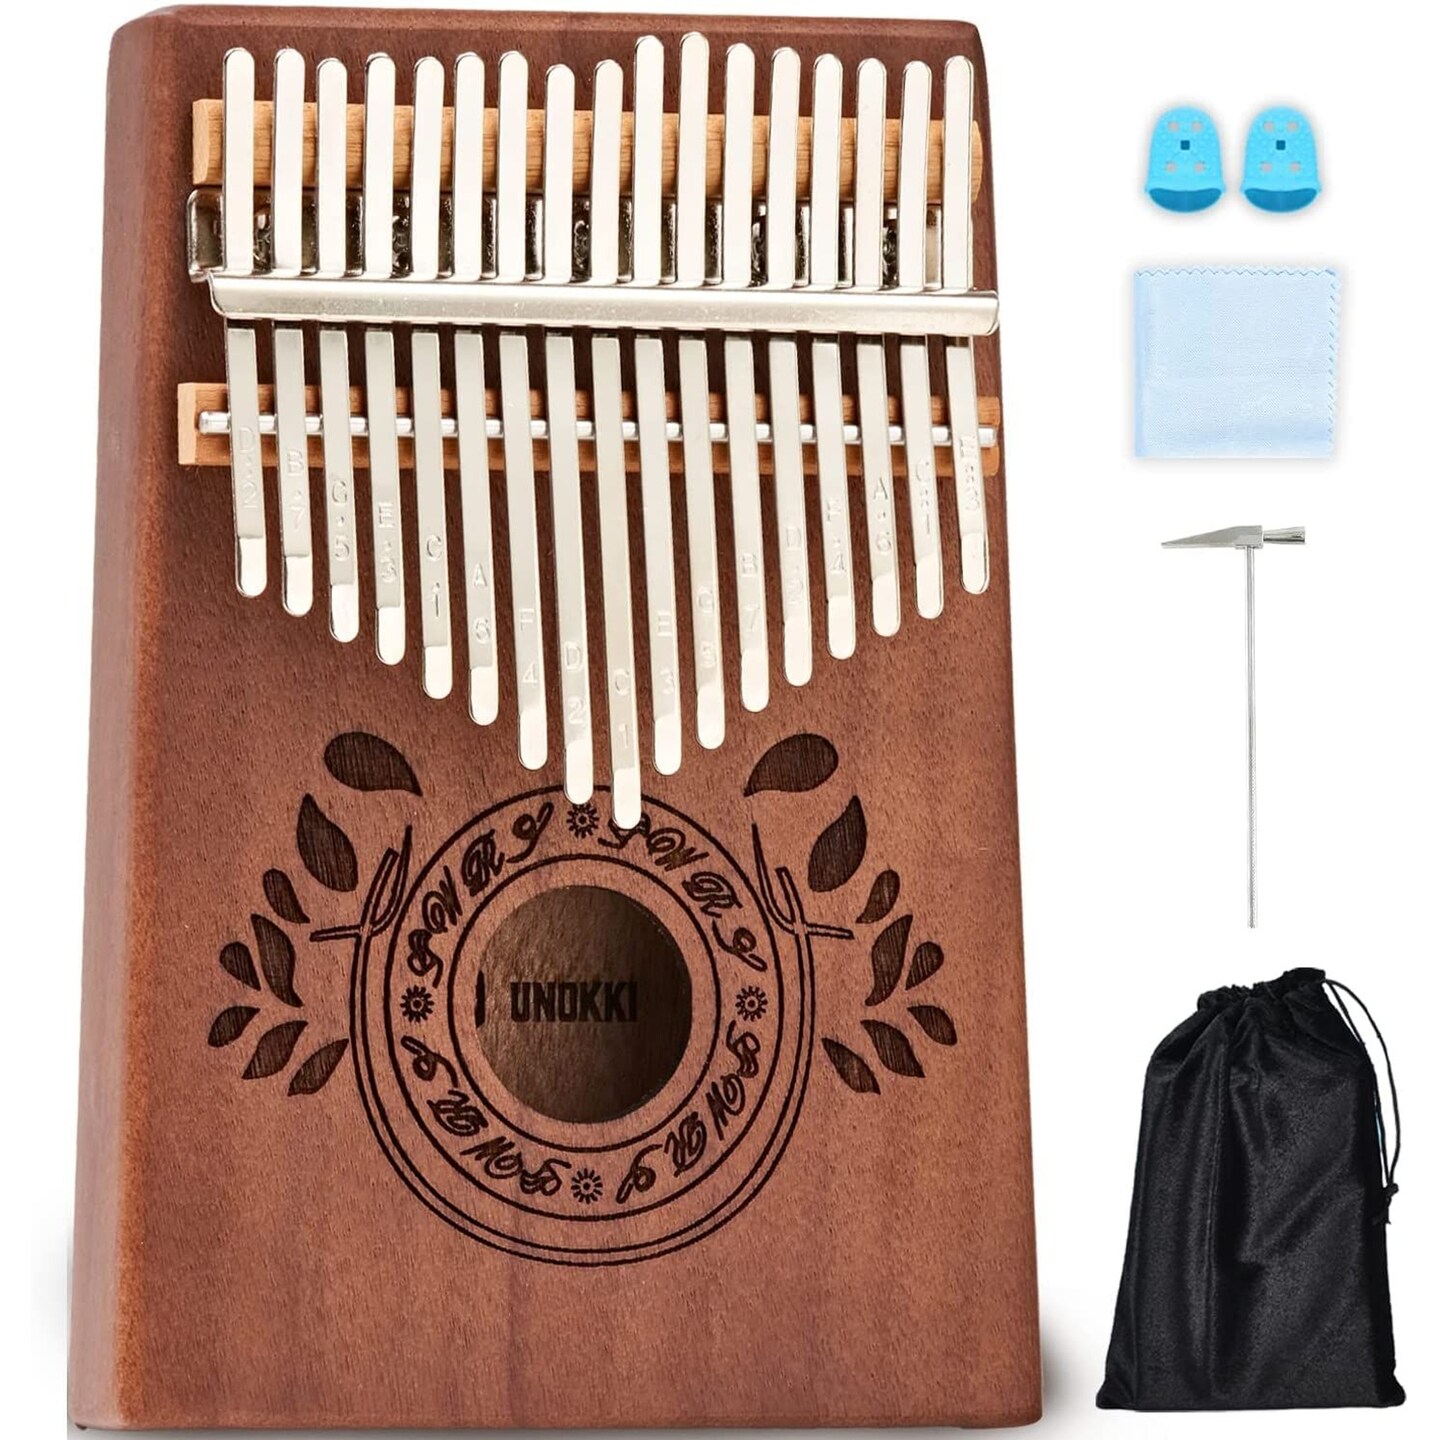 UNOKKI Kalimba 17 Key Thumb Piano, Portable Mahogany Mbira Piano with Instruction, Carrying Bag &#x26; Tune Hammer, Reduces Stress &#x26; Promotes Well-being, Gift for Kids, Men, Music Lovers - Chocolate Brown